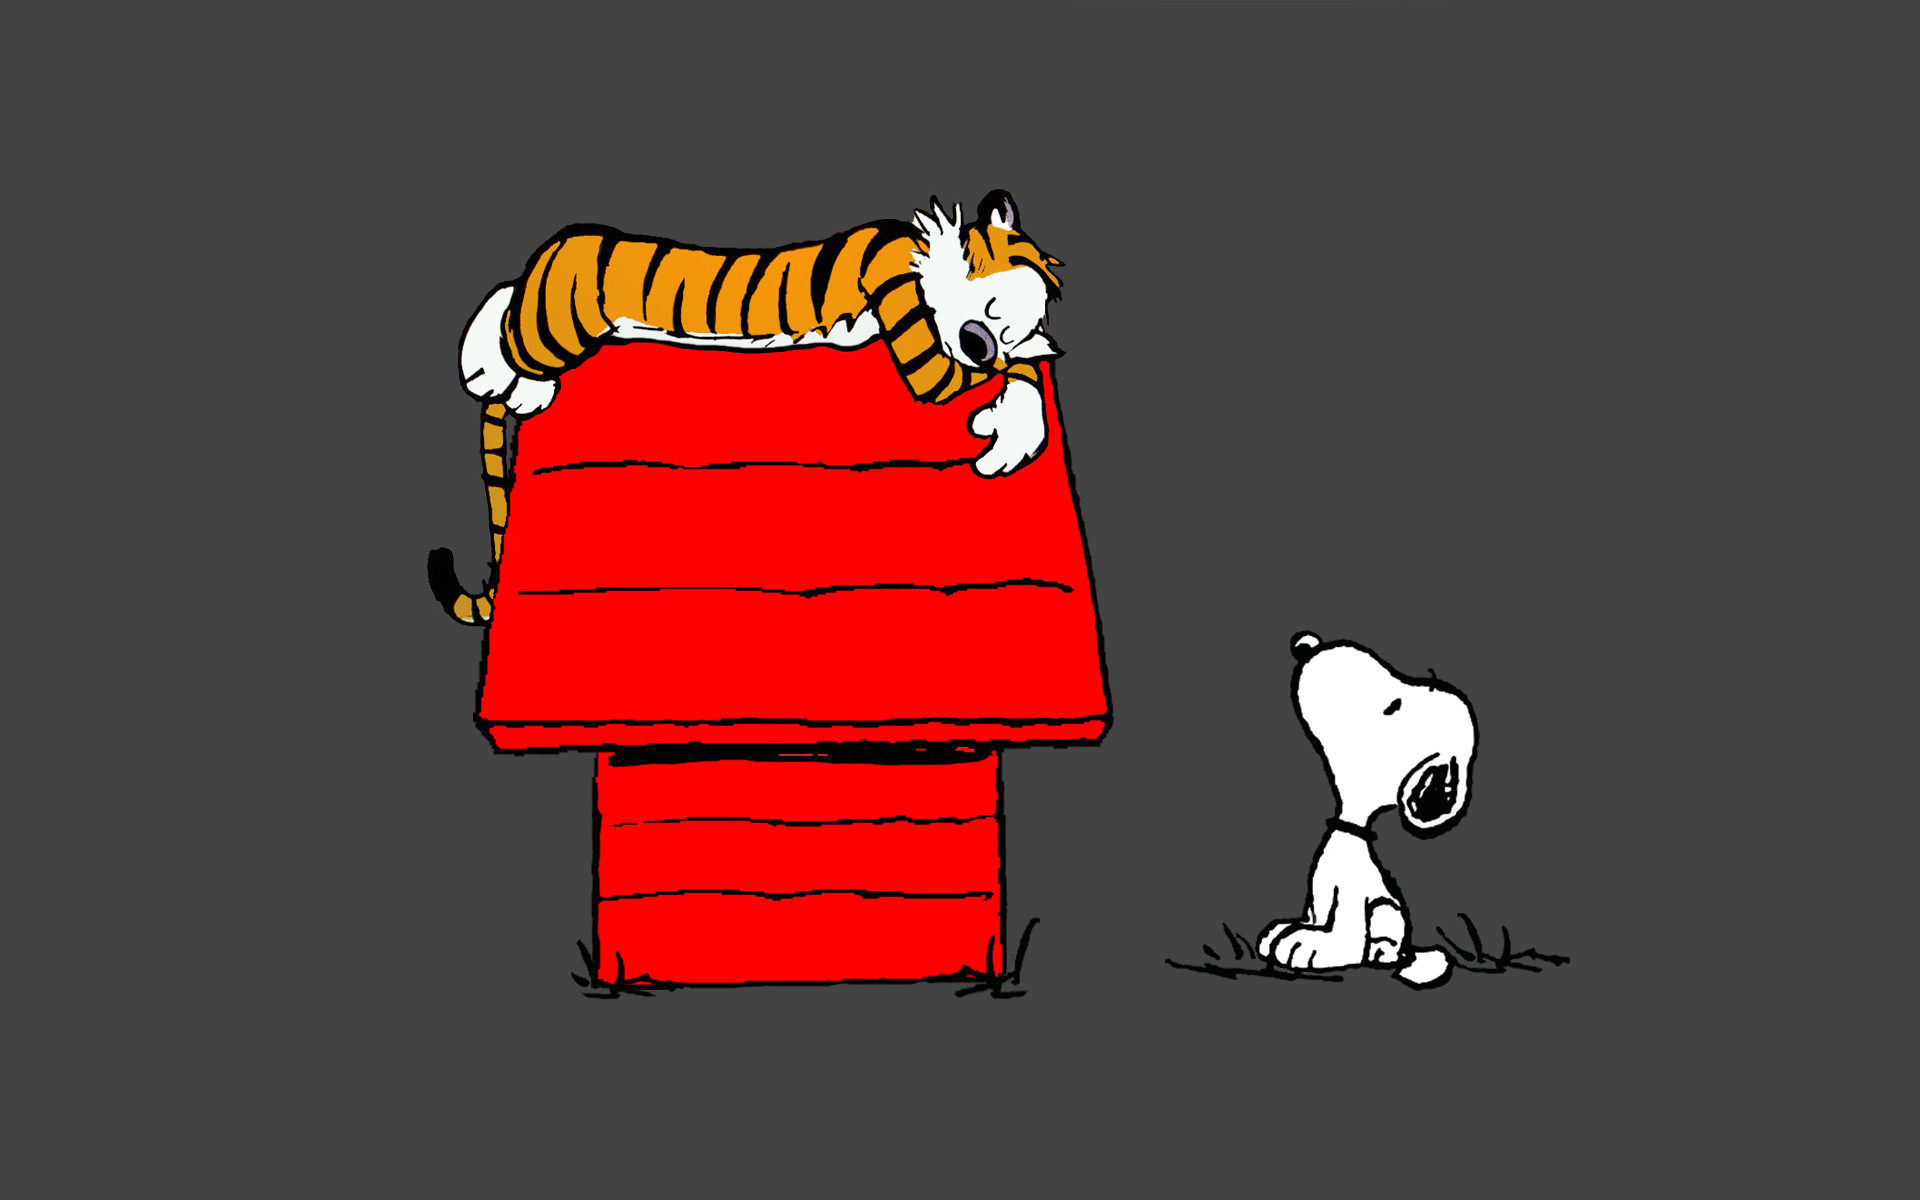 Free Download Calvin And Hobbes Snoopy Sleep Peanuts Tiger Wallpaper 19x10 19x10 For Your Desktop Mobile Tablet Explore 47 Calvin And Hobbes Iphone Wallpaper Calvin And Hobbes Hd Wallpaper